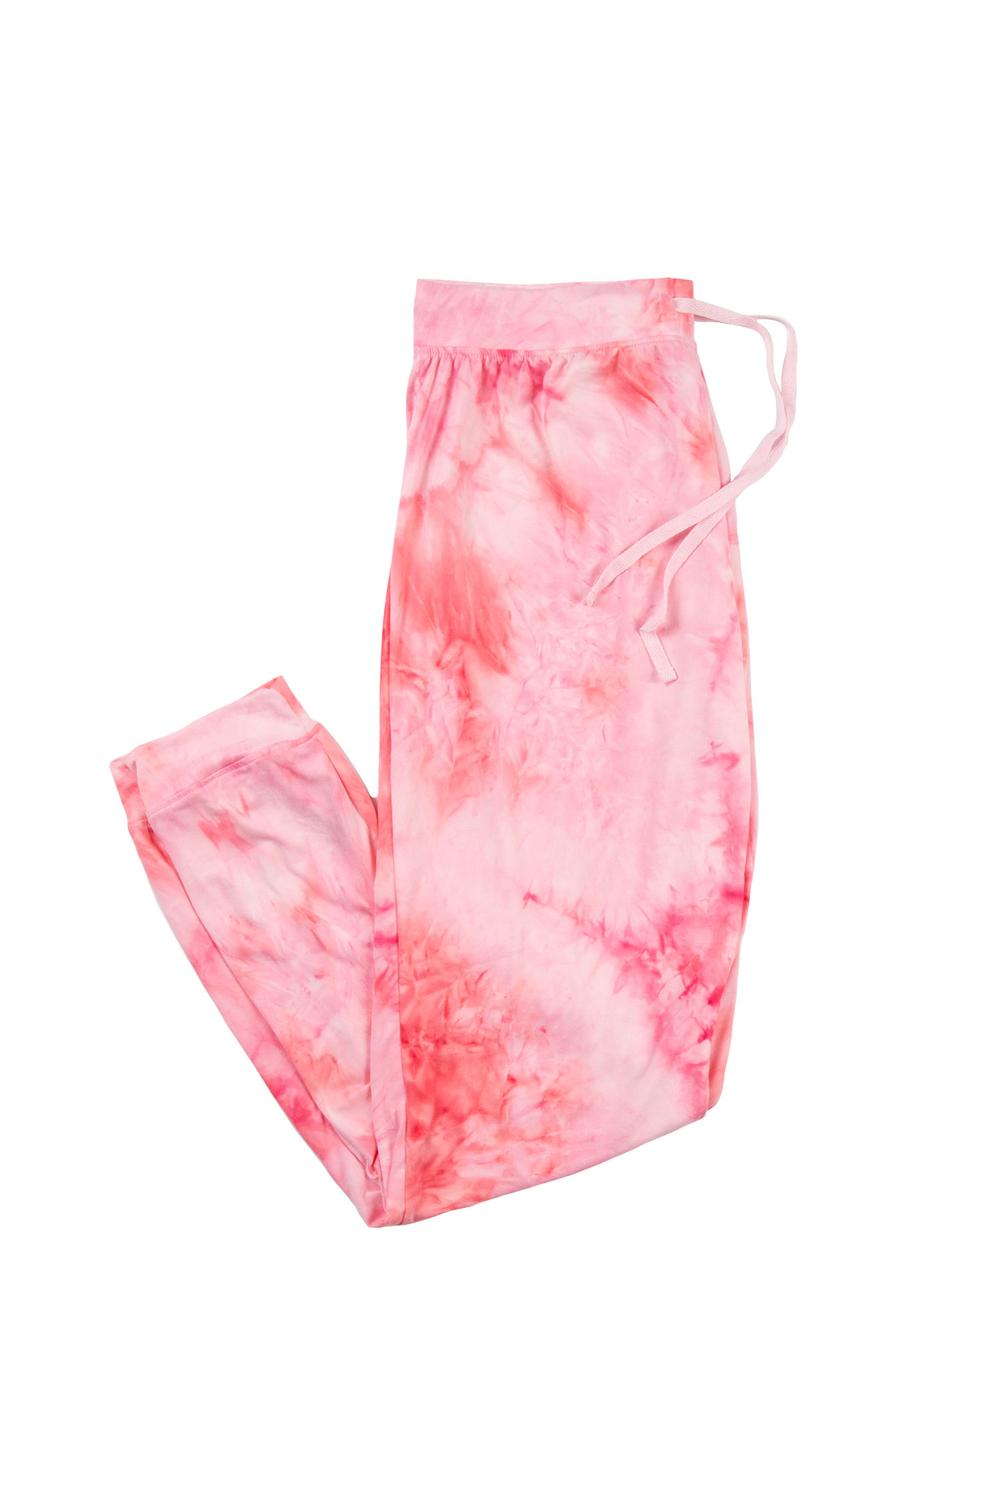 Stretch knit jogger style pajama pants, pink tie-dye, small (S)